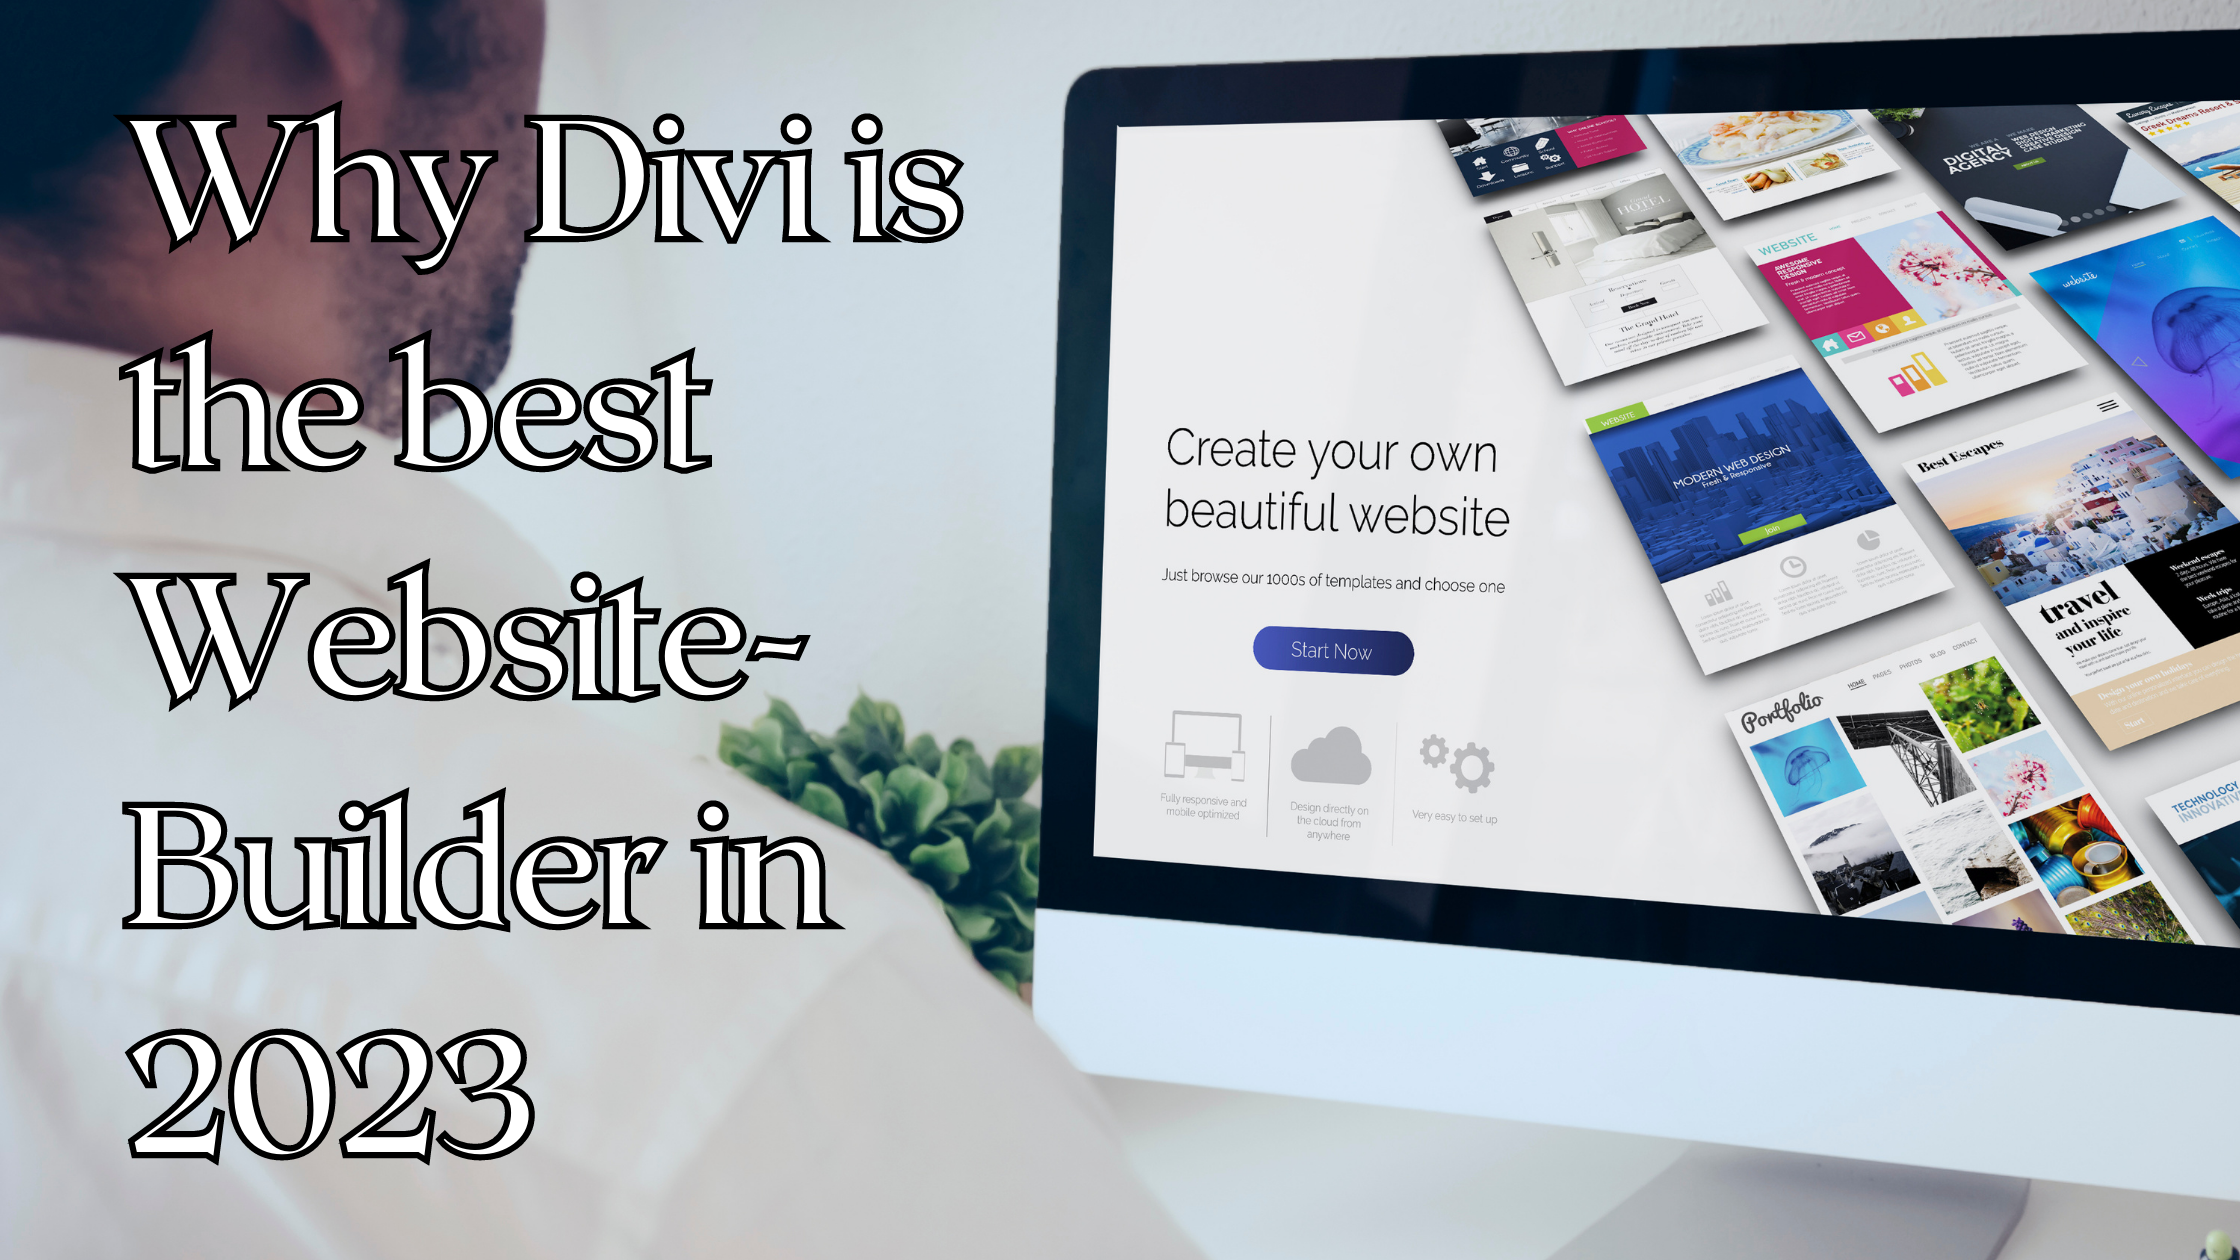 Why Divi is the best Website-Builder in 2023